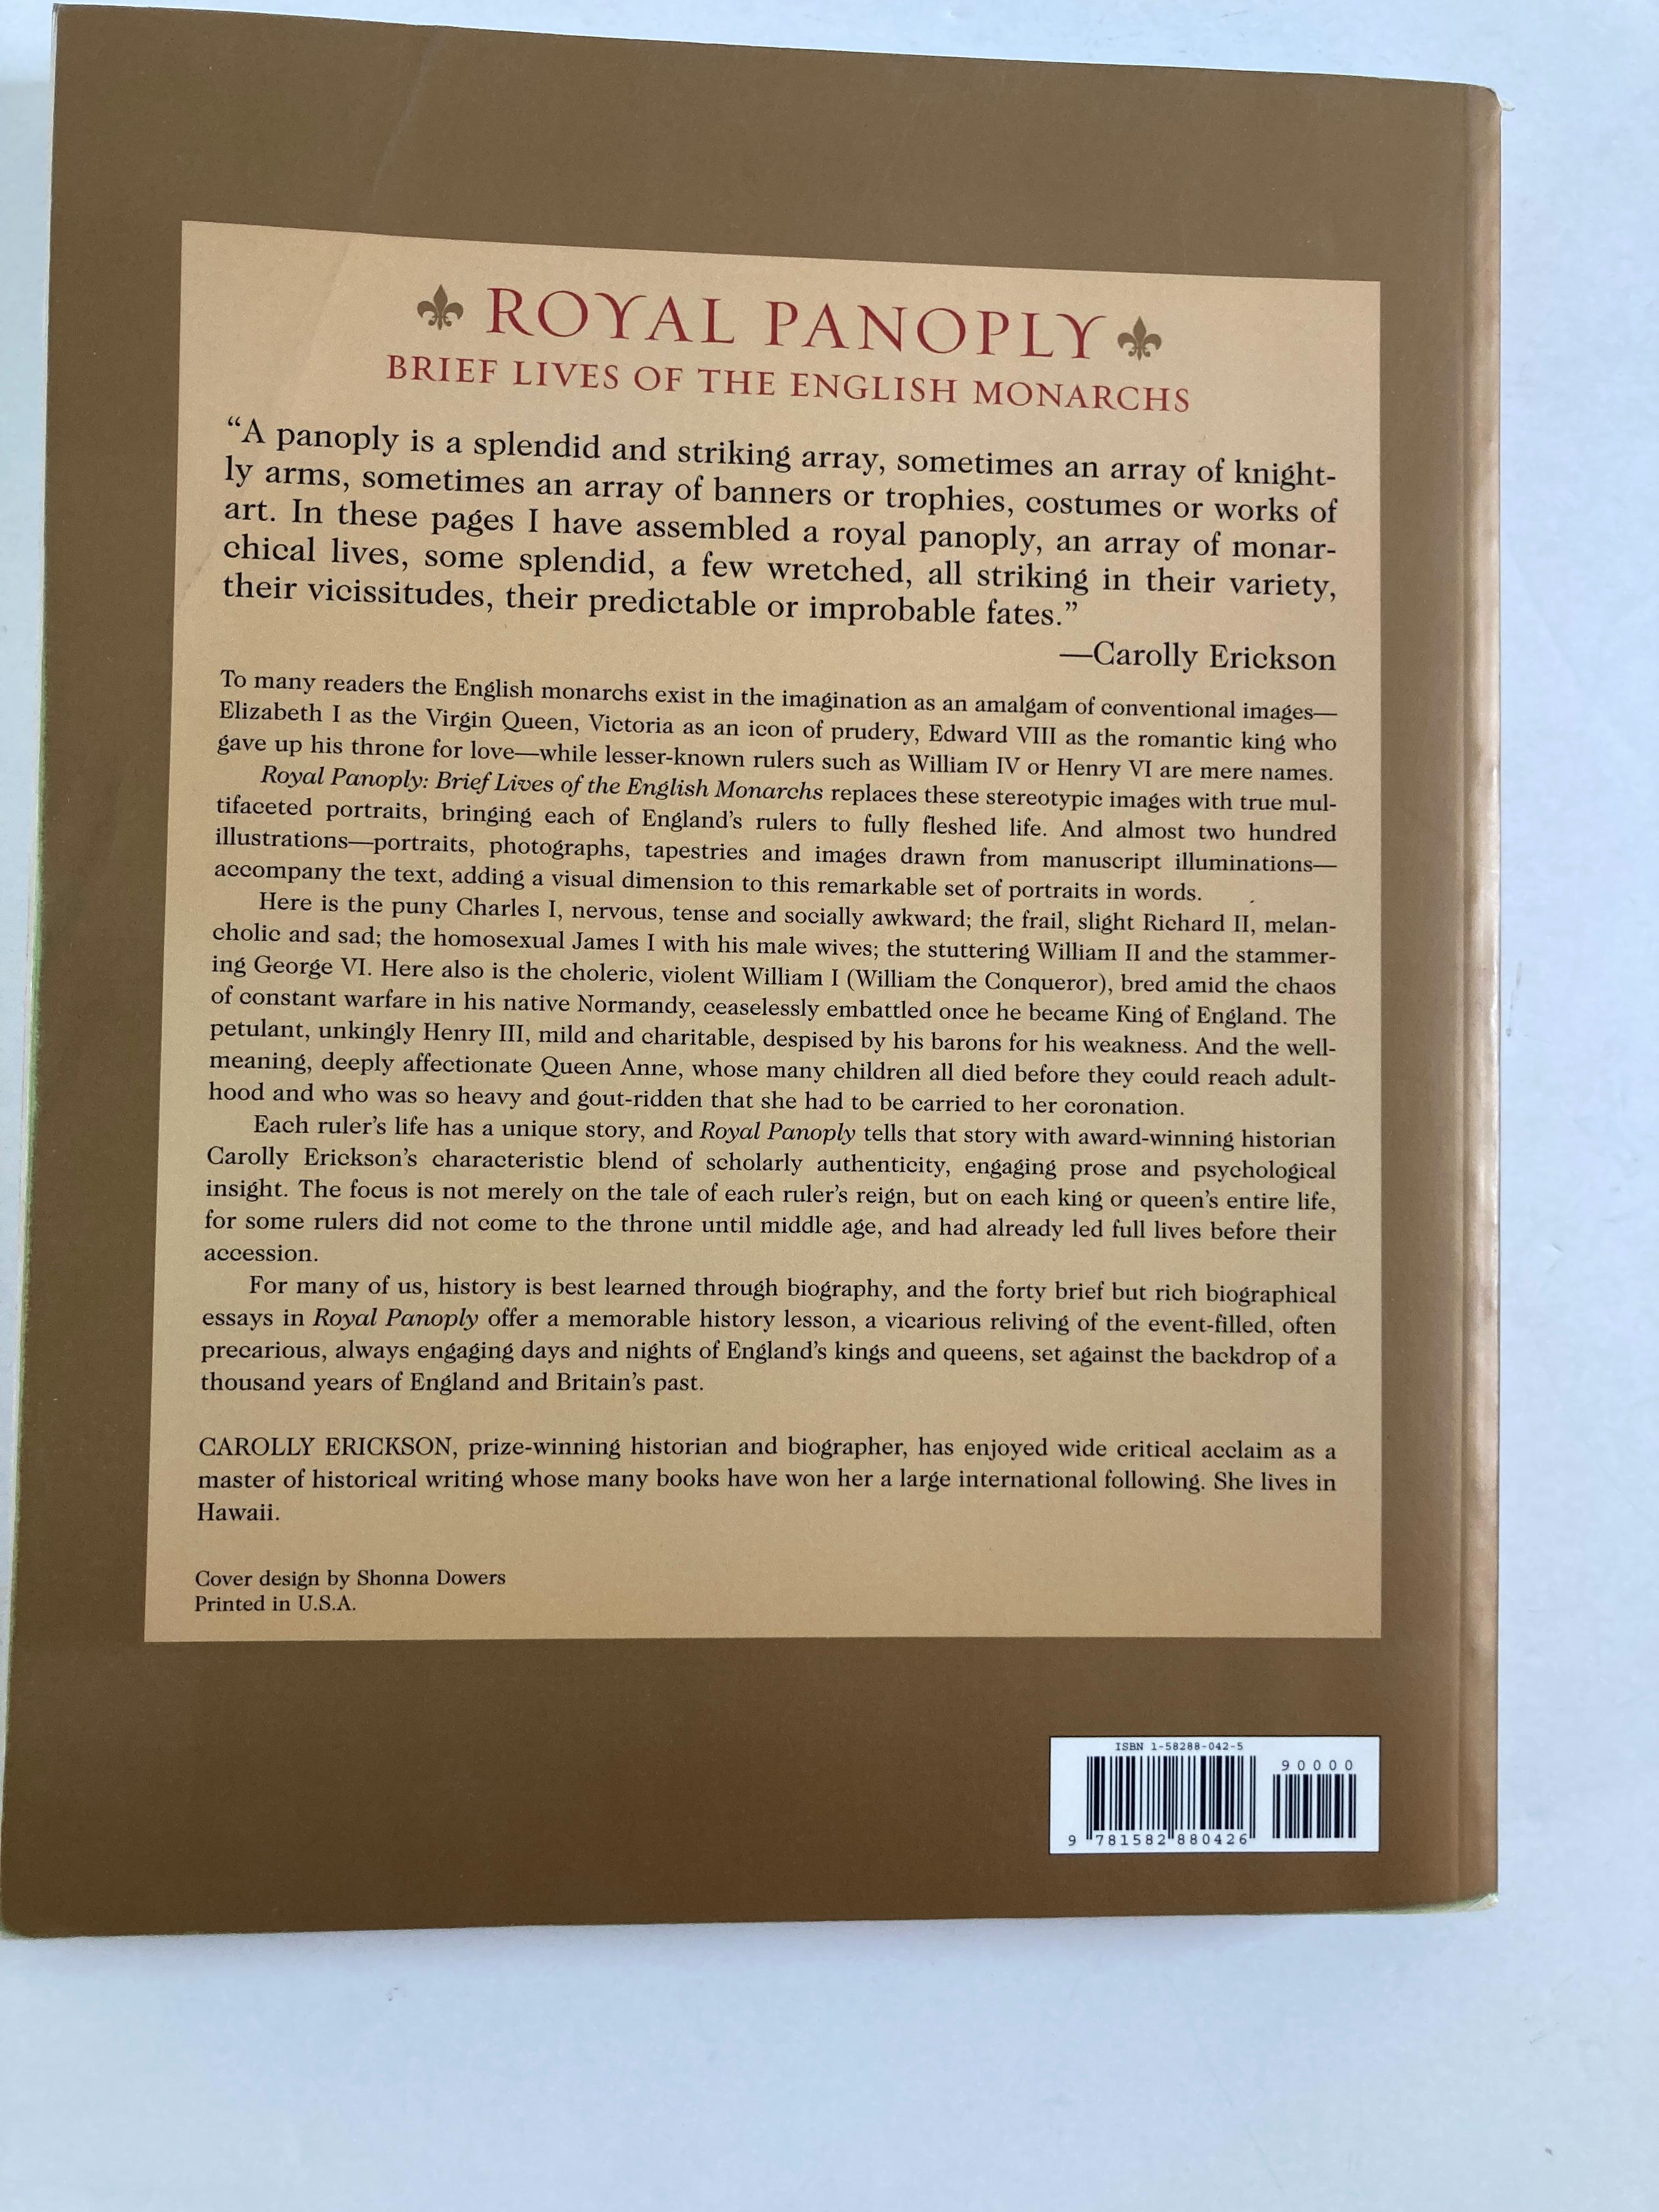 Georgian Royal Panoply Brief Lives of the English Monarchs by Carolly Erickson Book For Sale